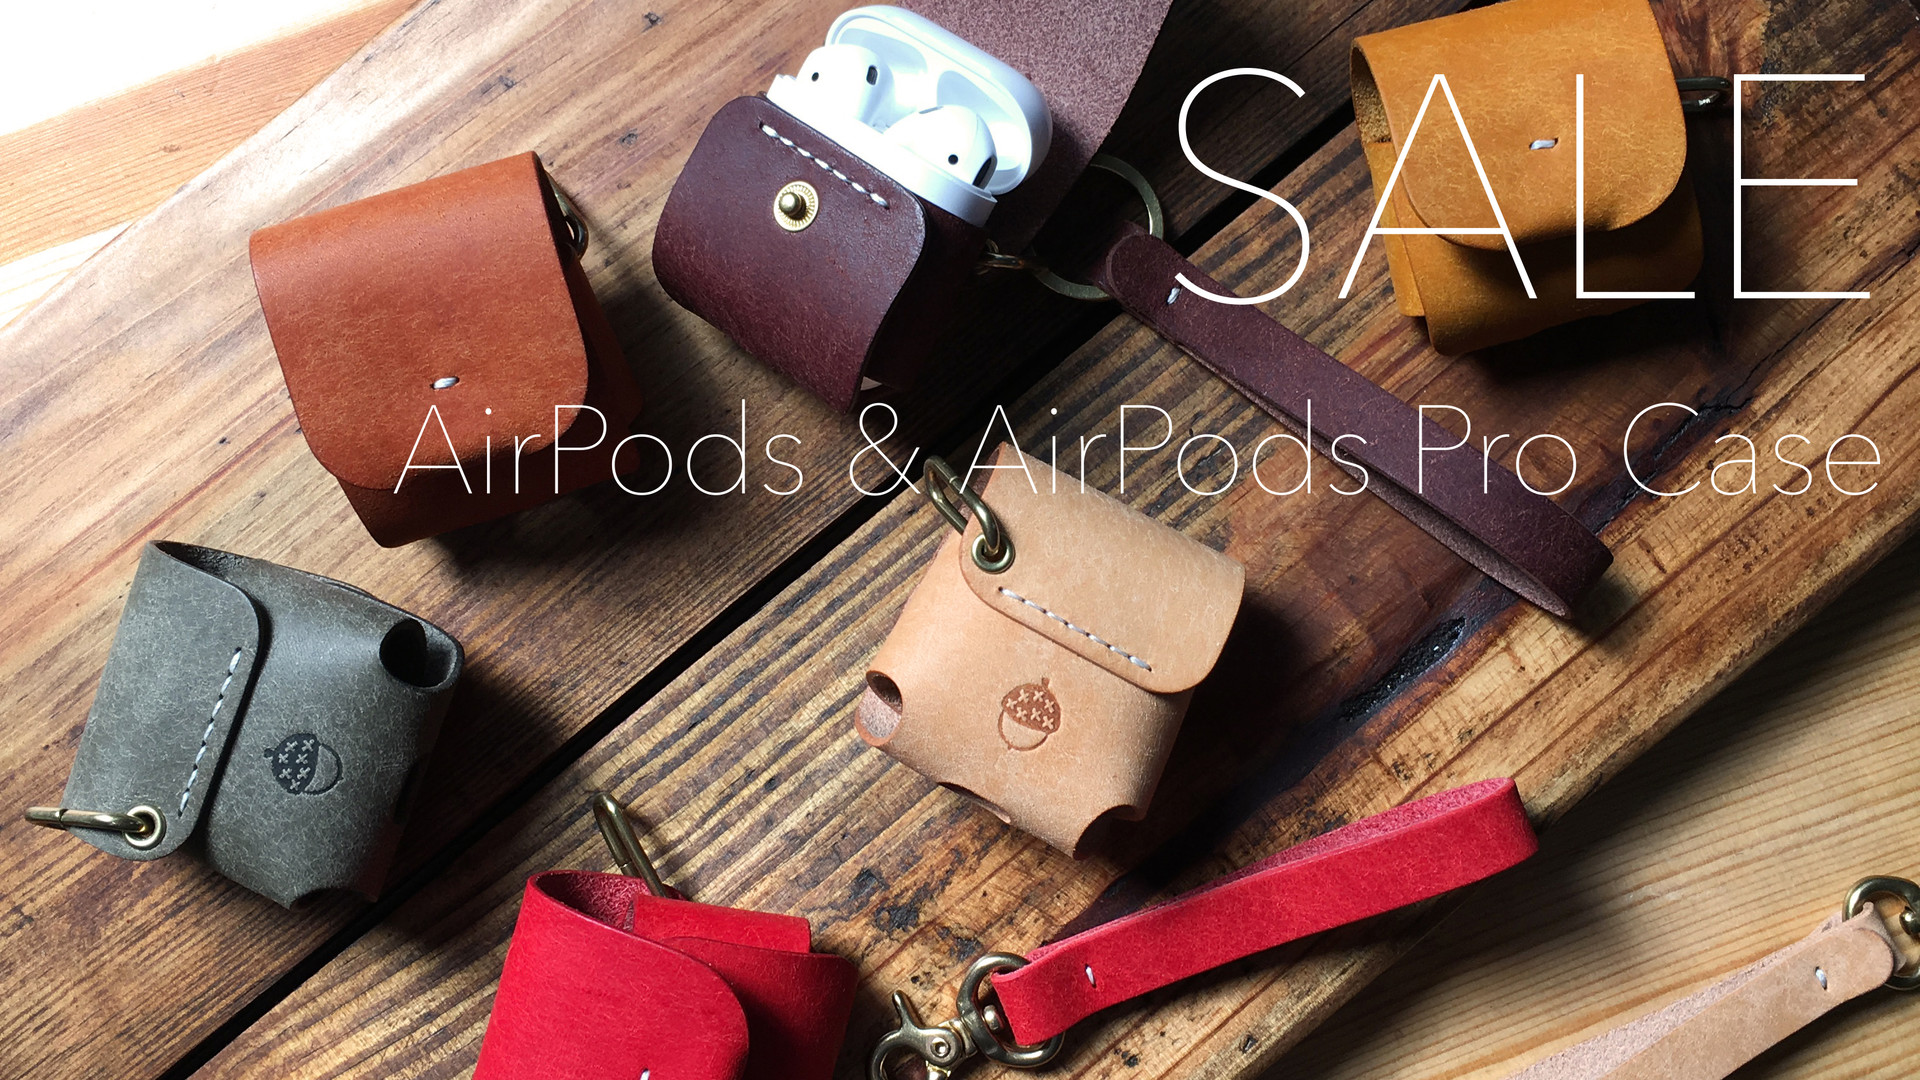 SALE airpods & pro